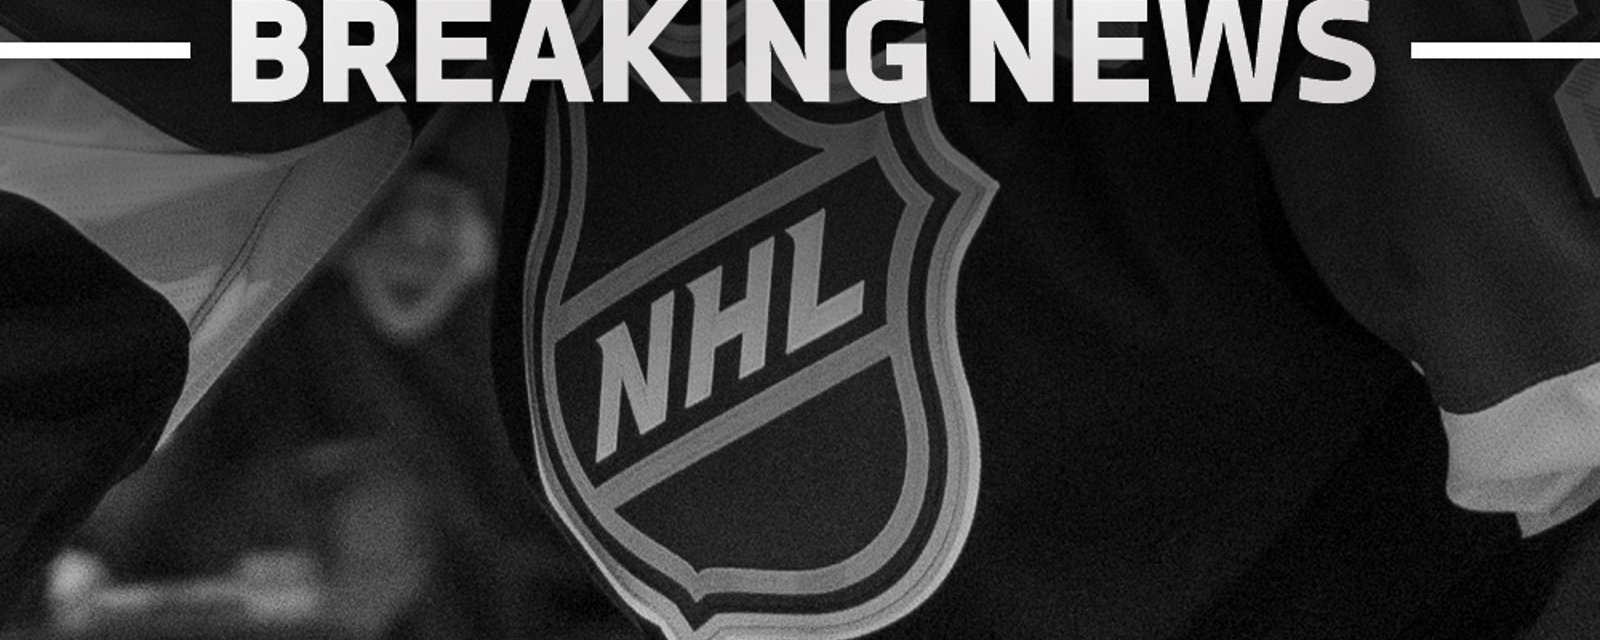 BREAKING: Blackhawks Sign Player to 3-year deal